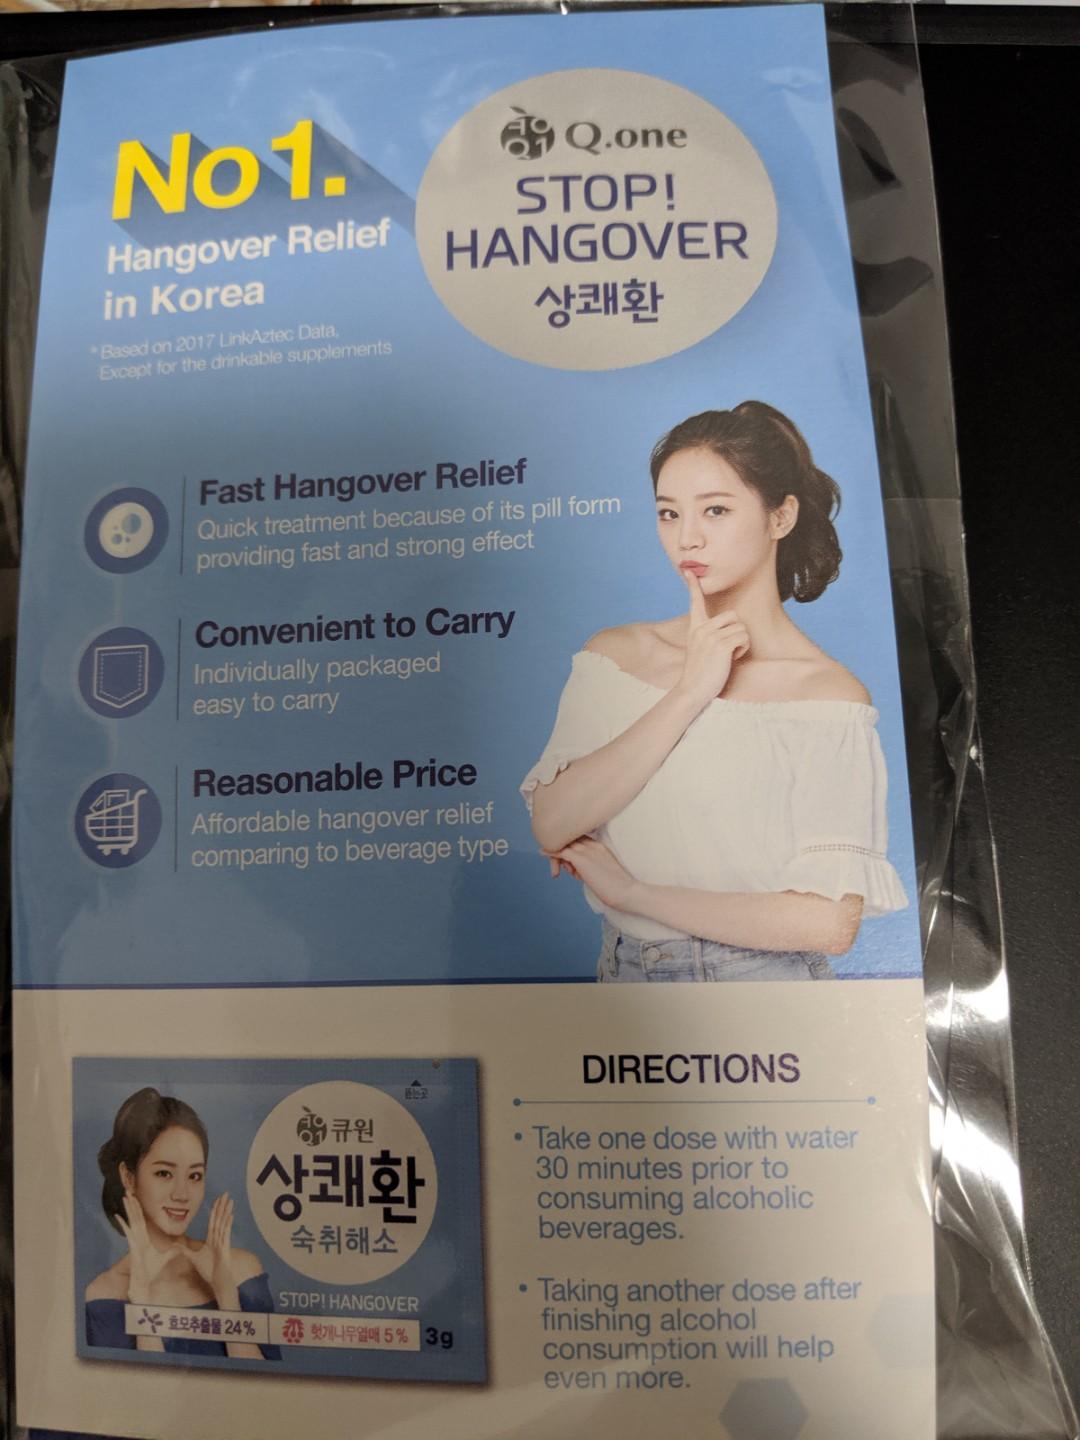 https://media.karousell.com/media/photos/products/2019/05/30/q_one_stop_hangover_and_easy_tomorrow_1559229494_a18faf1d_progressive.jpg